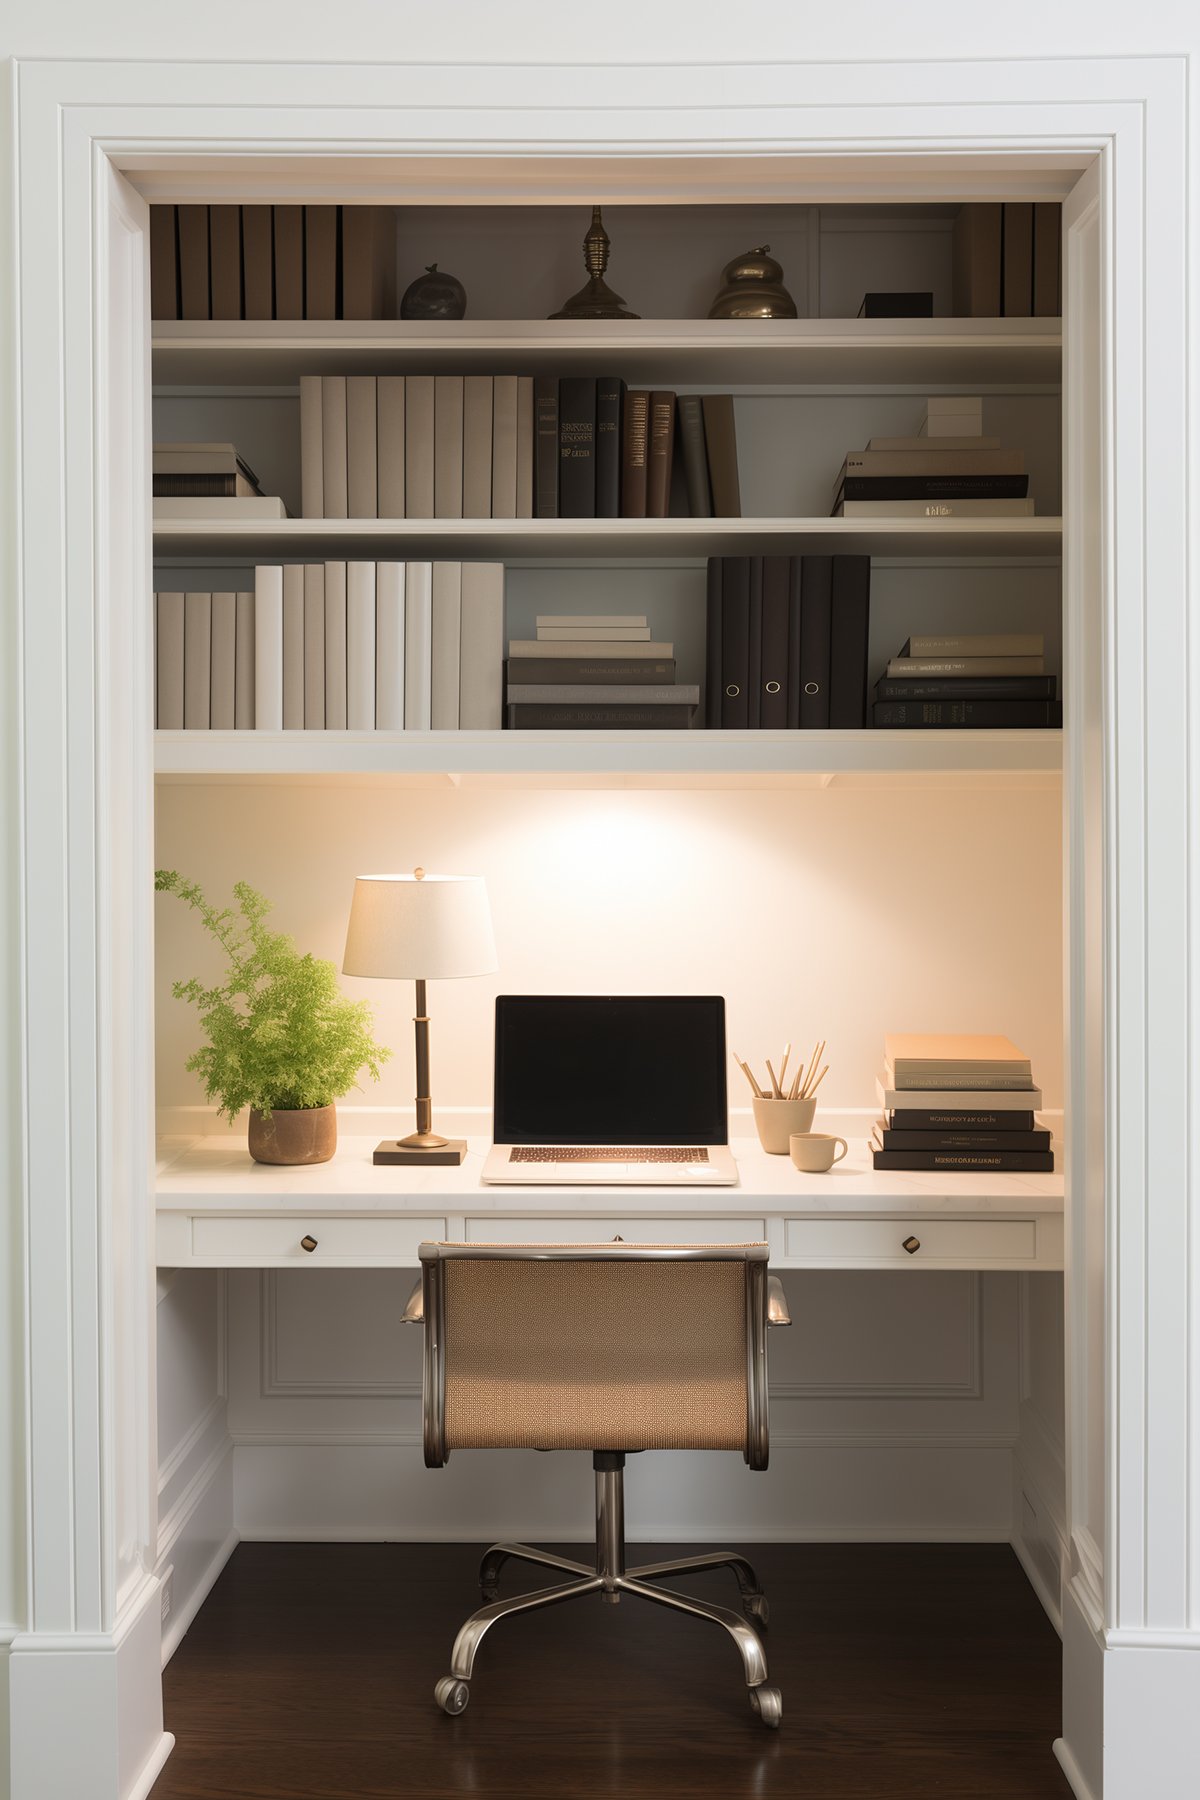 closet turned office with a built-in desk and shelves.